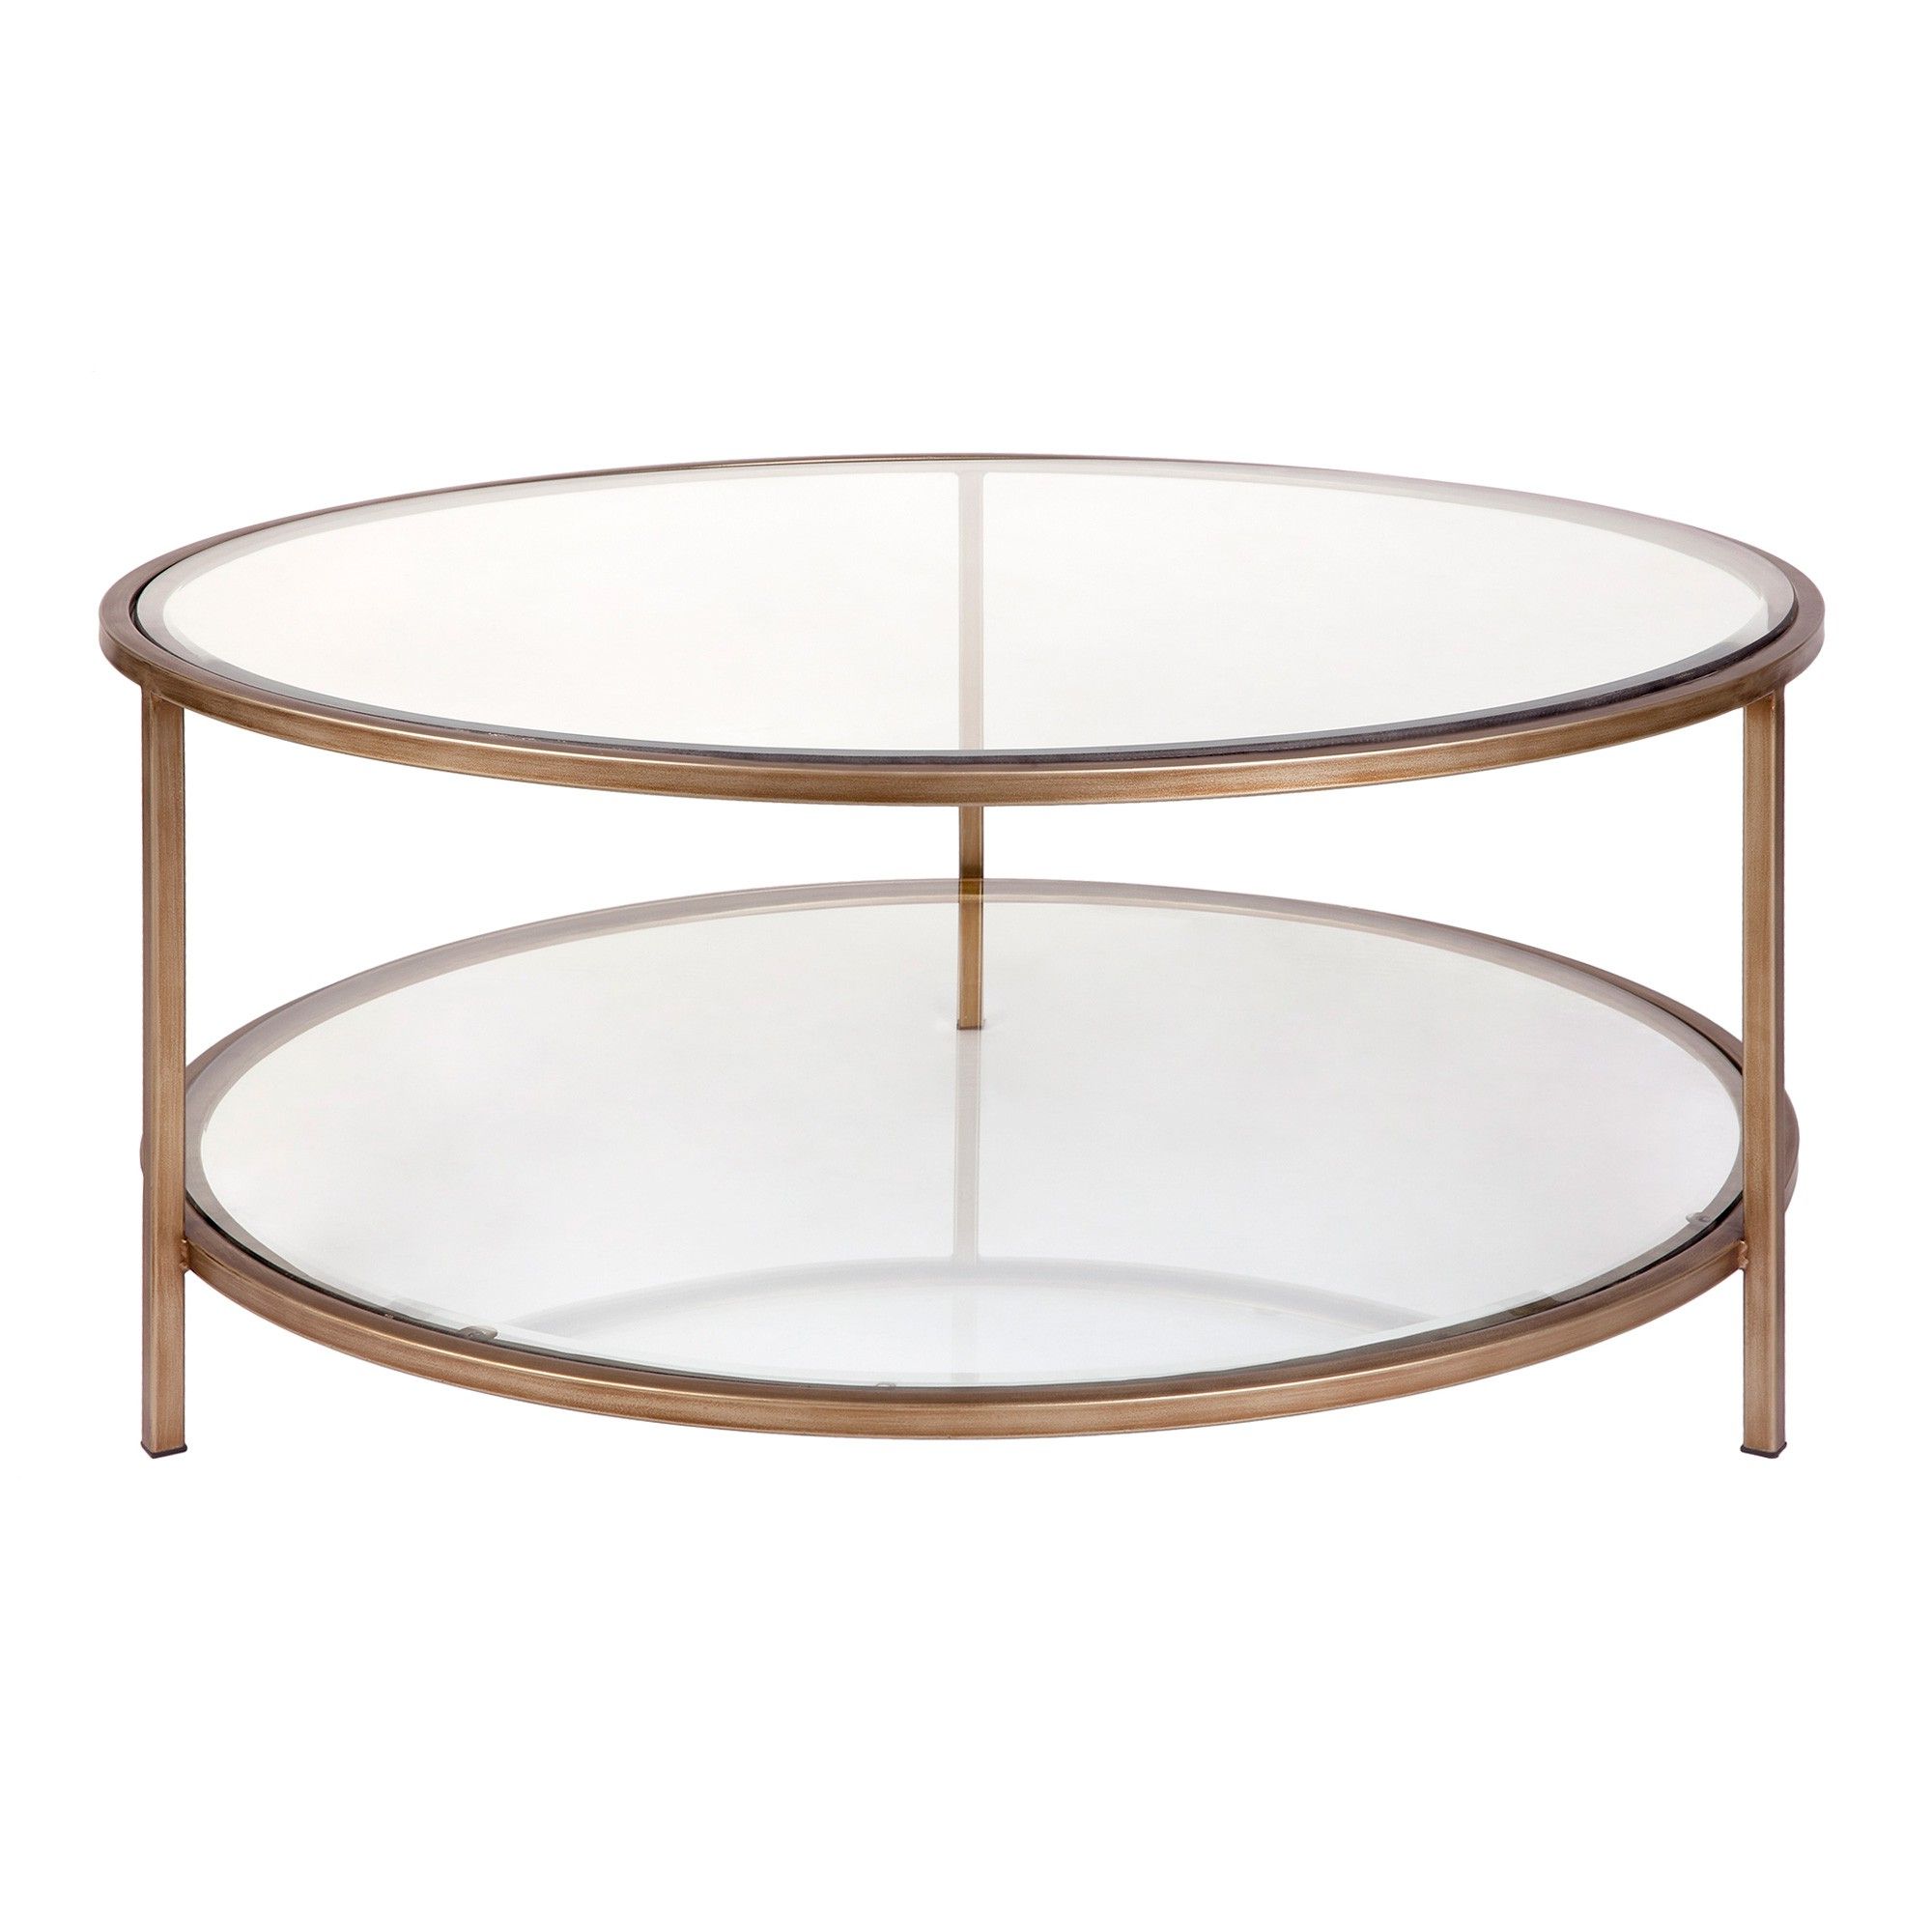 Antique Gold Nesting Coffee Tables Within Trendy Cocktail Glass Top Iron Round Coffee Table, 100cm, Antique (View 9 of 20)